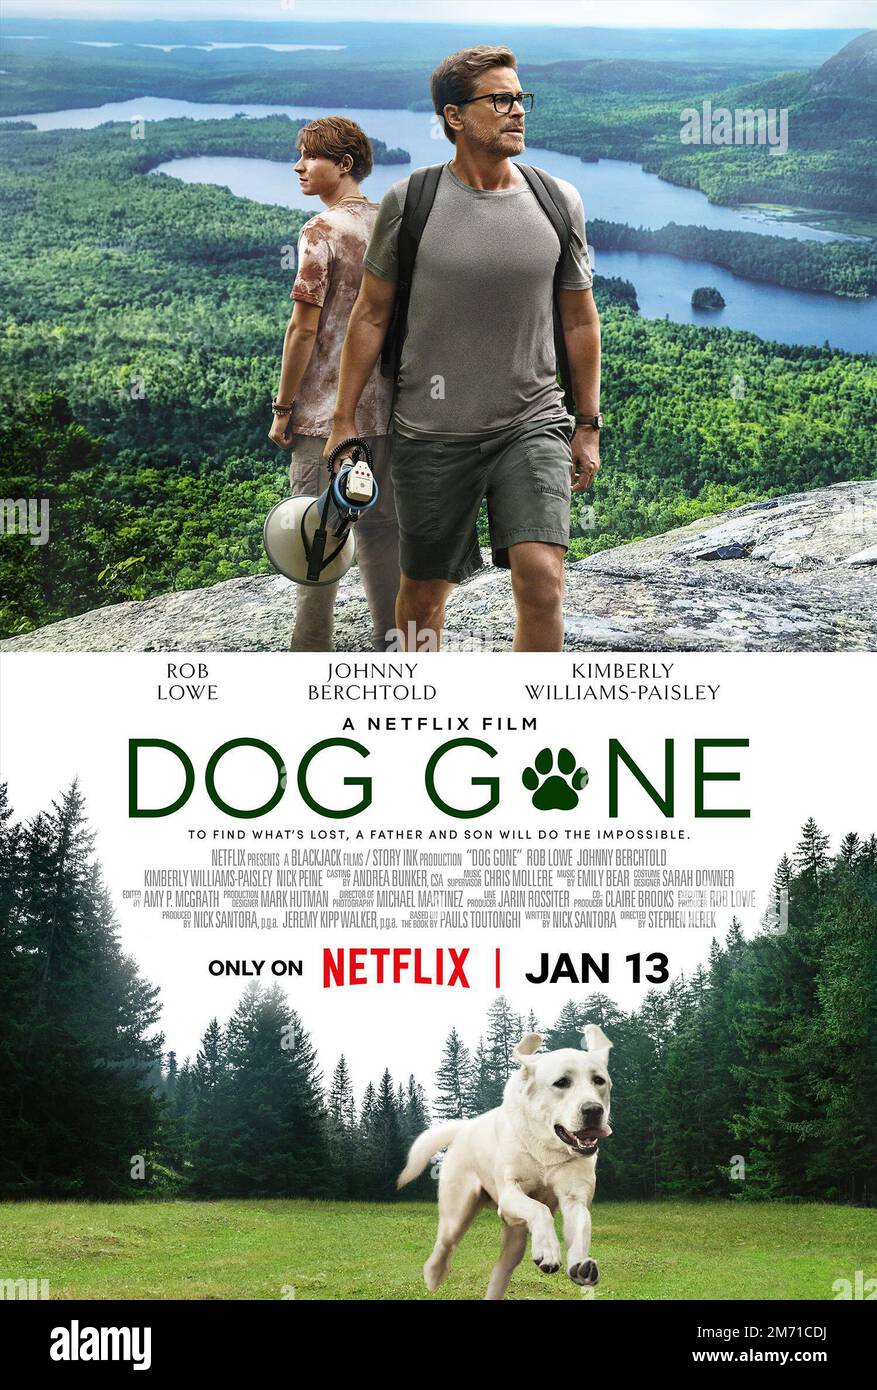 RELEASE DATE: January 13, 2023. TITLE: Dog Gone. STUDIO: Netflix. DIRECTOR: Stephen Herek. PLOT: Based on the true story of a father and son who repair their fractured relationship during a forced hike of the Appalachian trail to find their beloved lost dog. STARRING: JOHNNY BERCHTOLD, ROB LOWE poster art. (Credit Image: © Netflix/Entertainment Pictures) Stock Photo